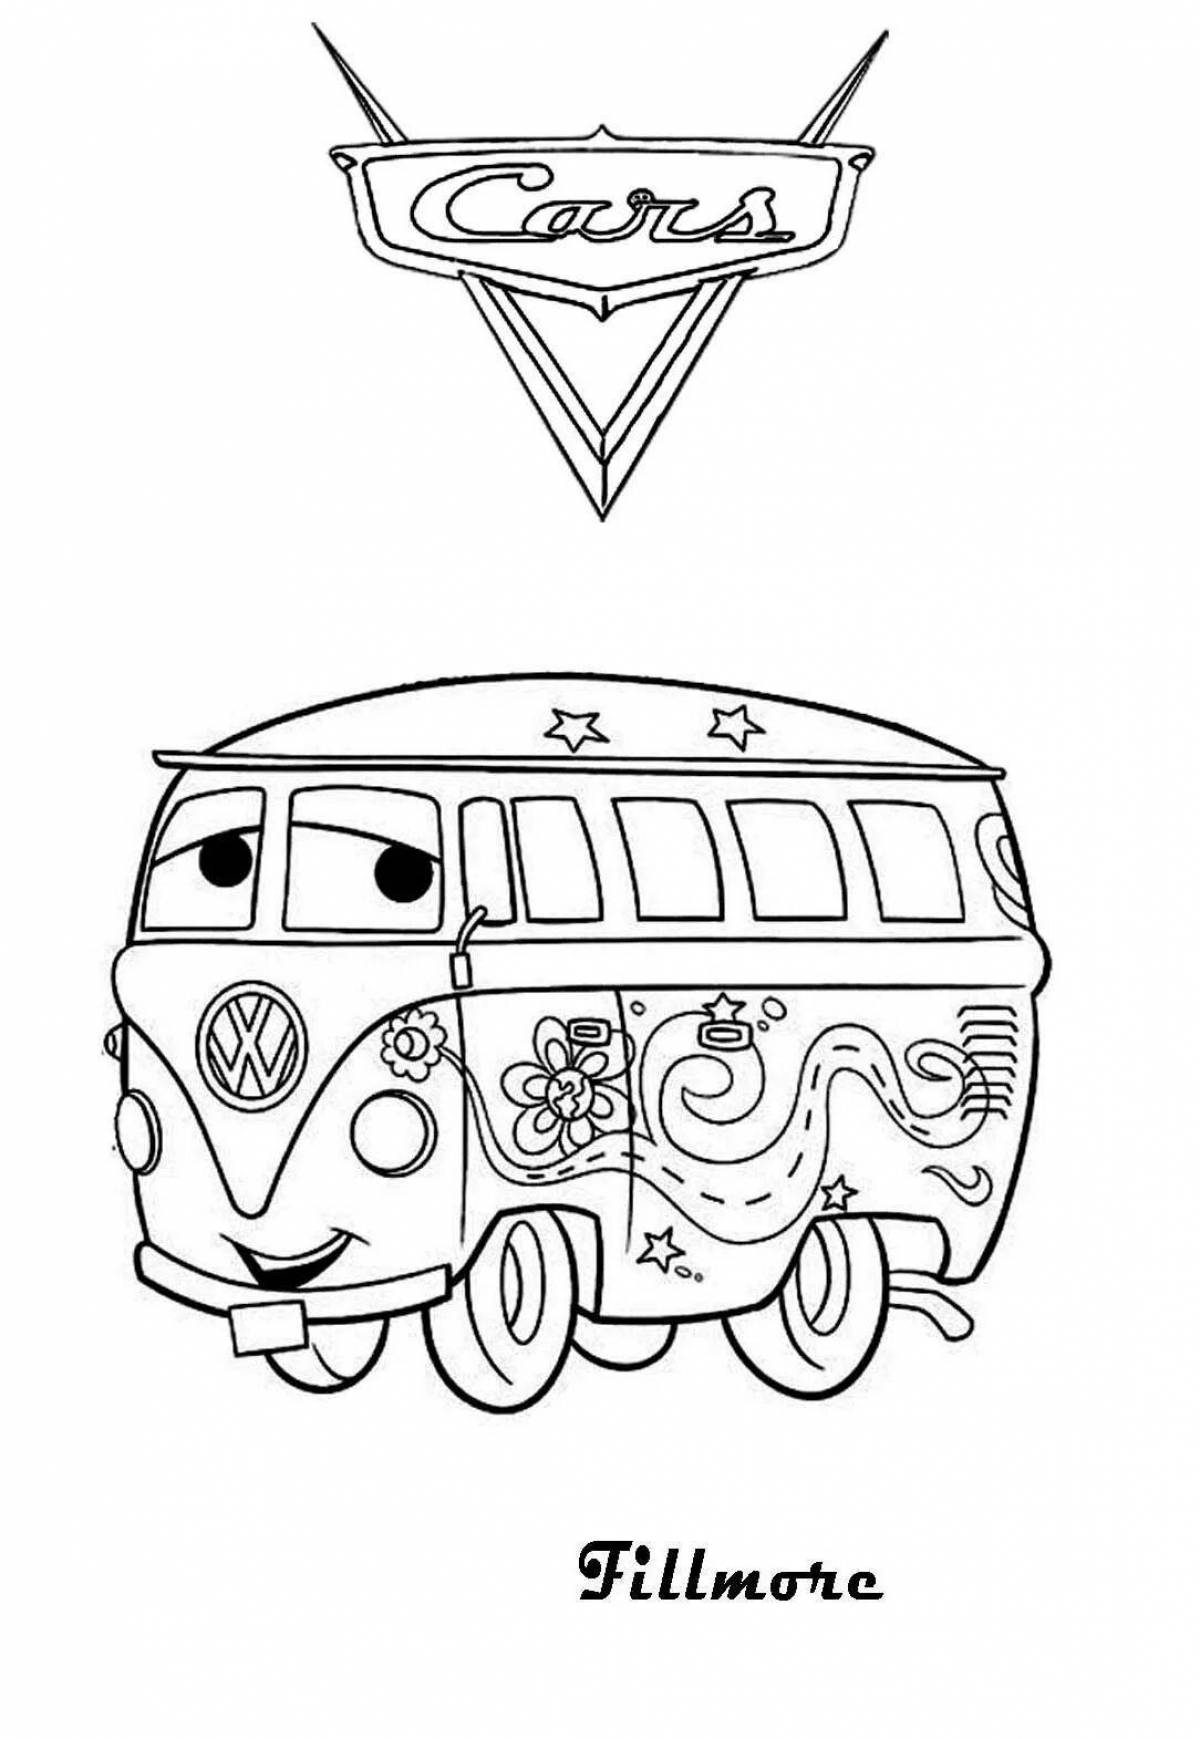 Colorful sheriff's car coloring page